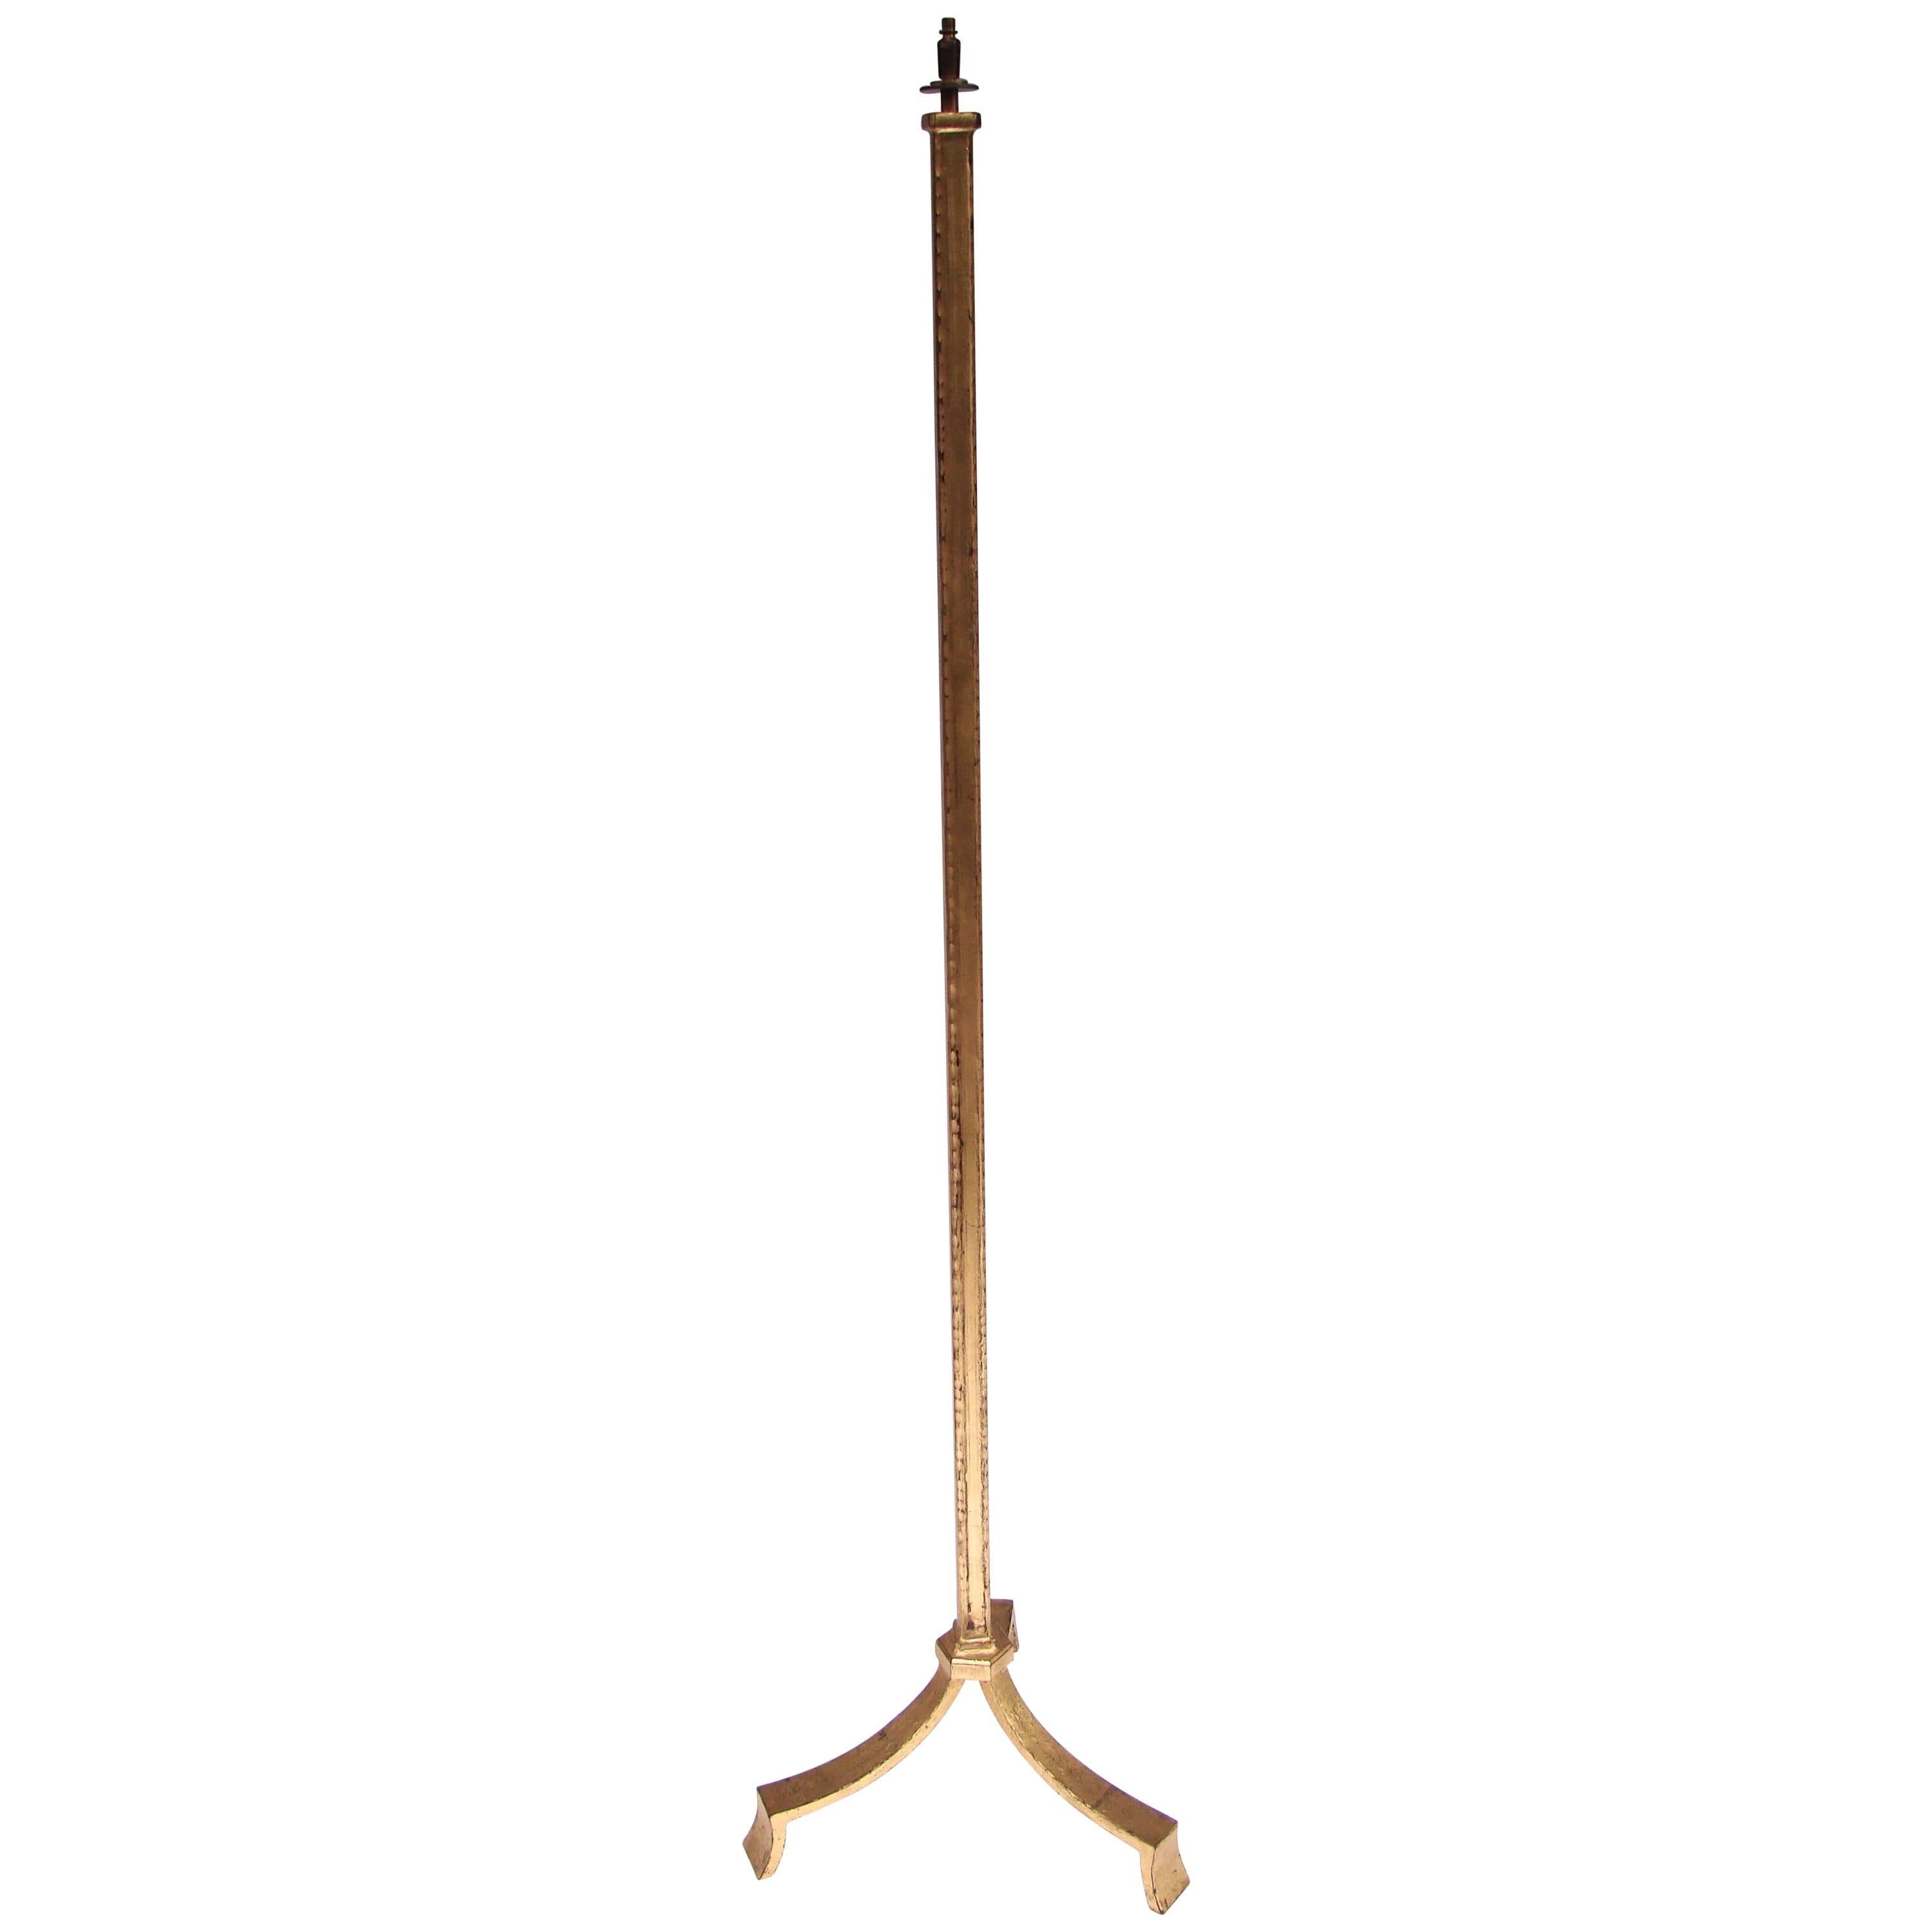 1940s French Gold Leaf Gilded Wrought Iron Floor Lamp by Maison Ramsay